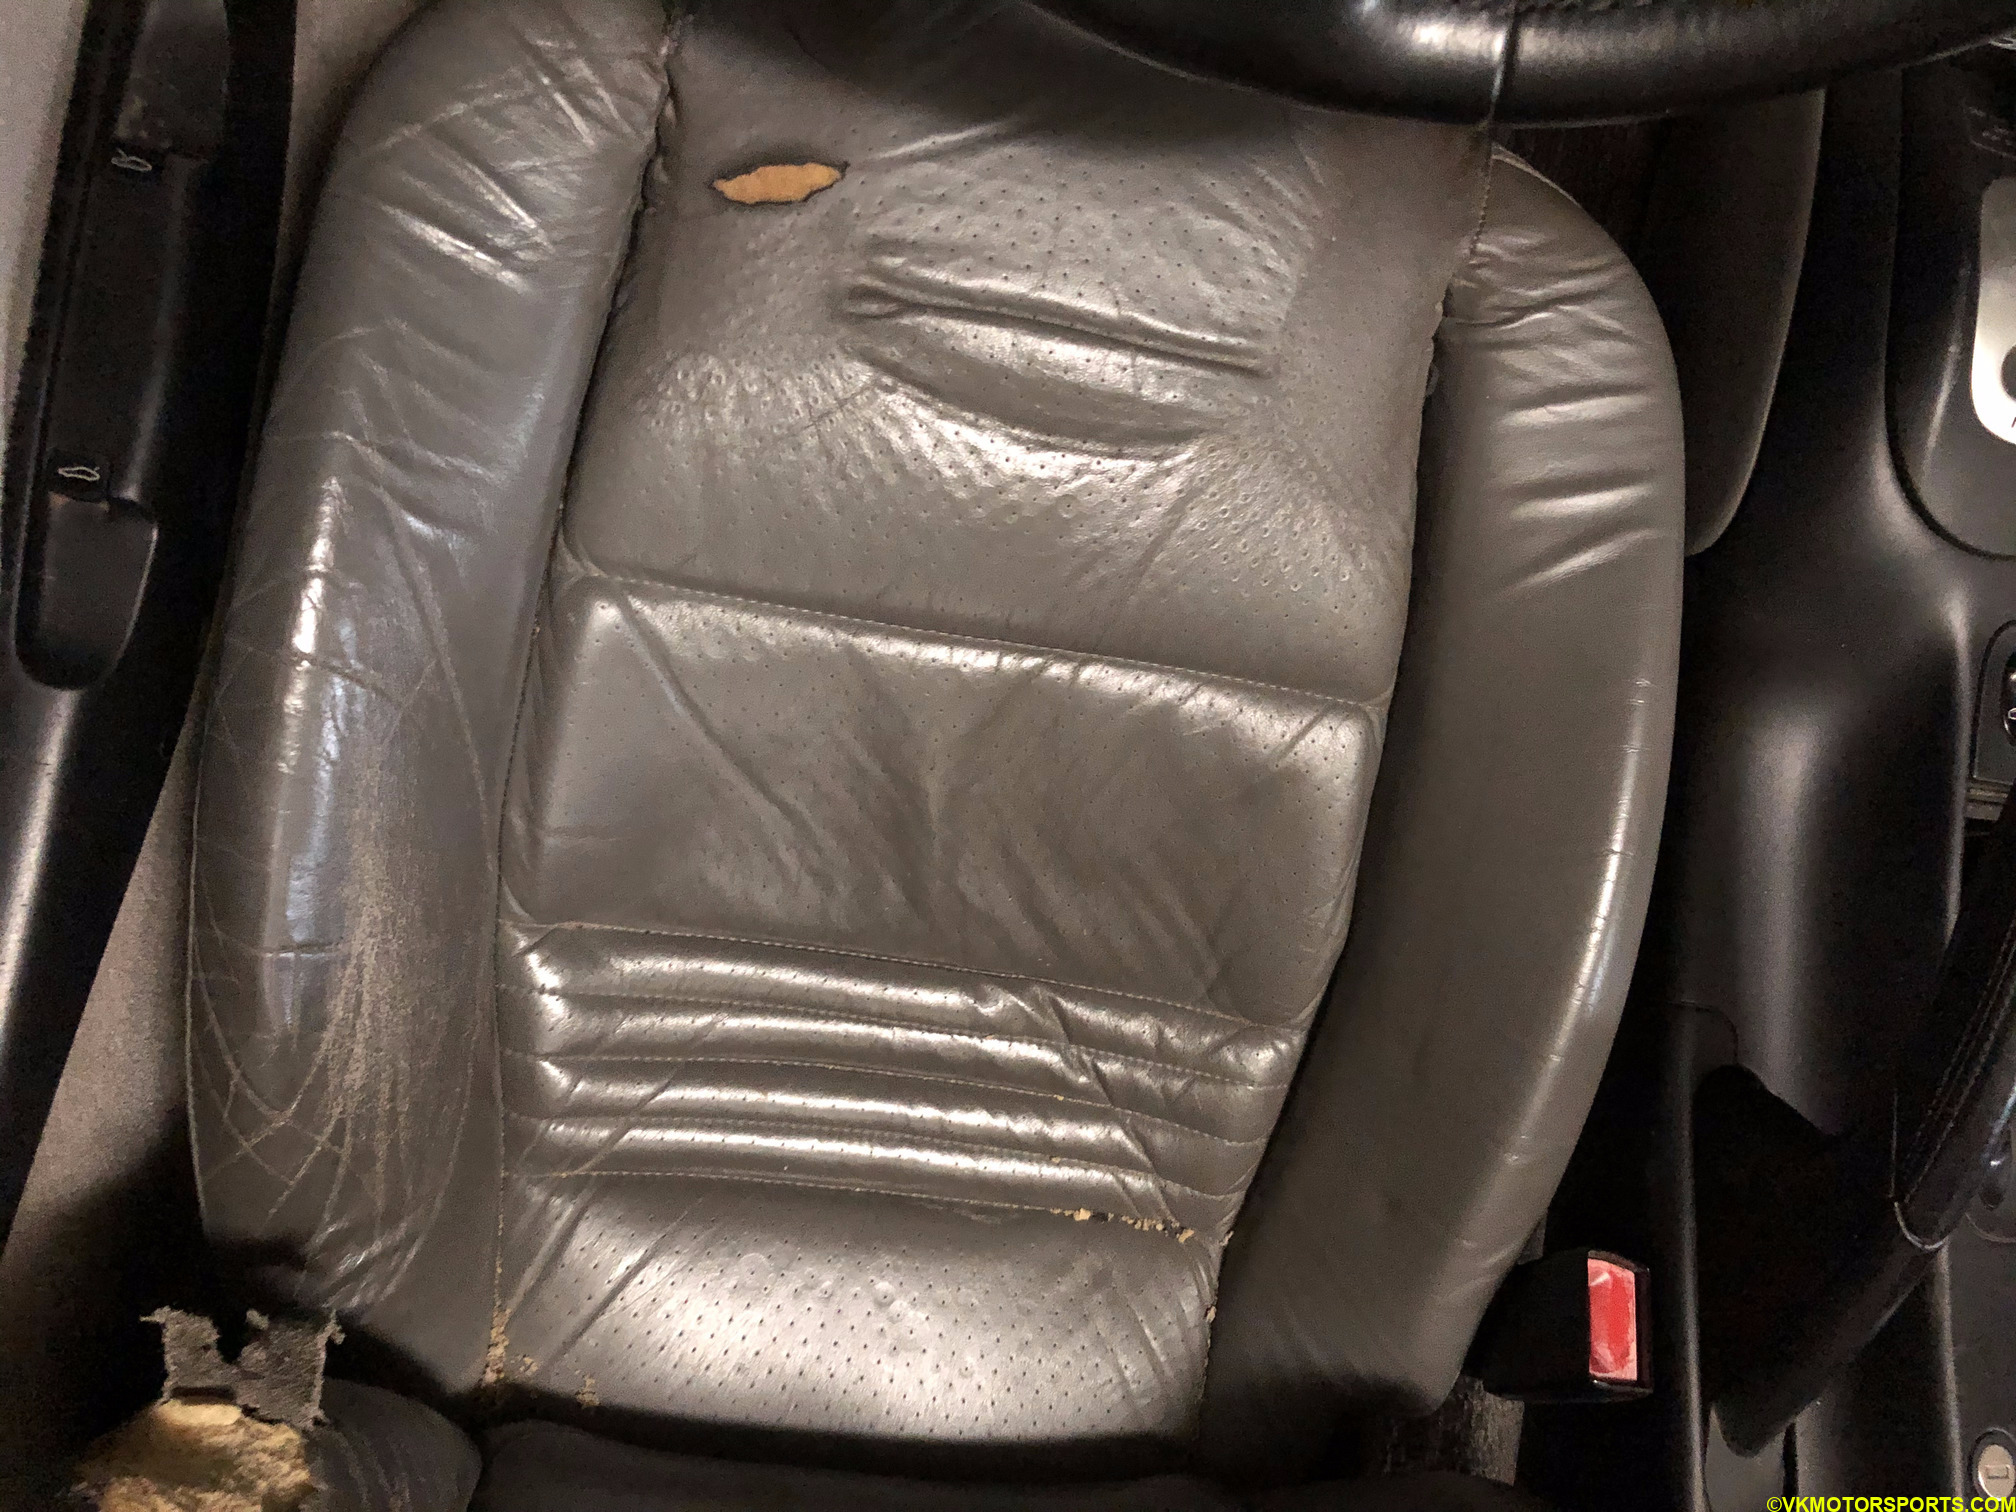 Figure 2. Driver's seat torn base